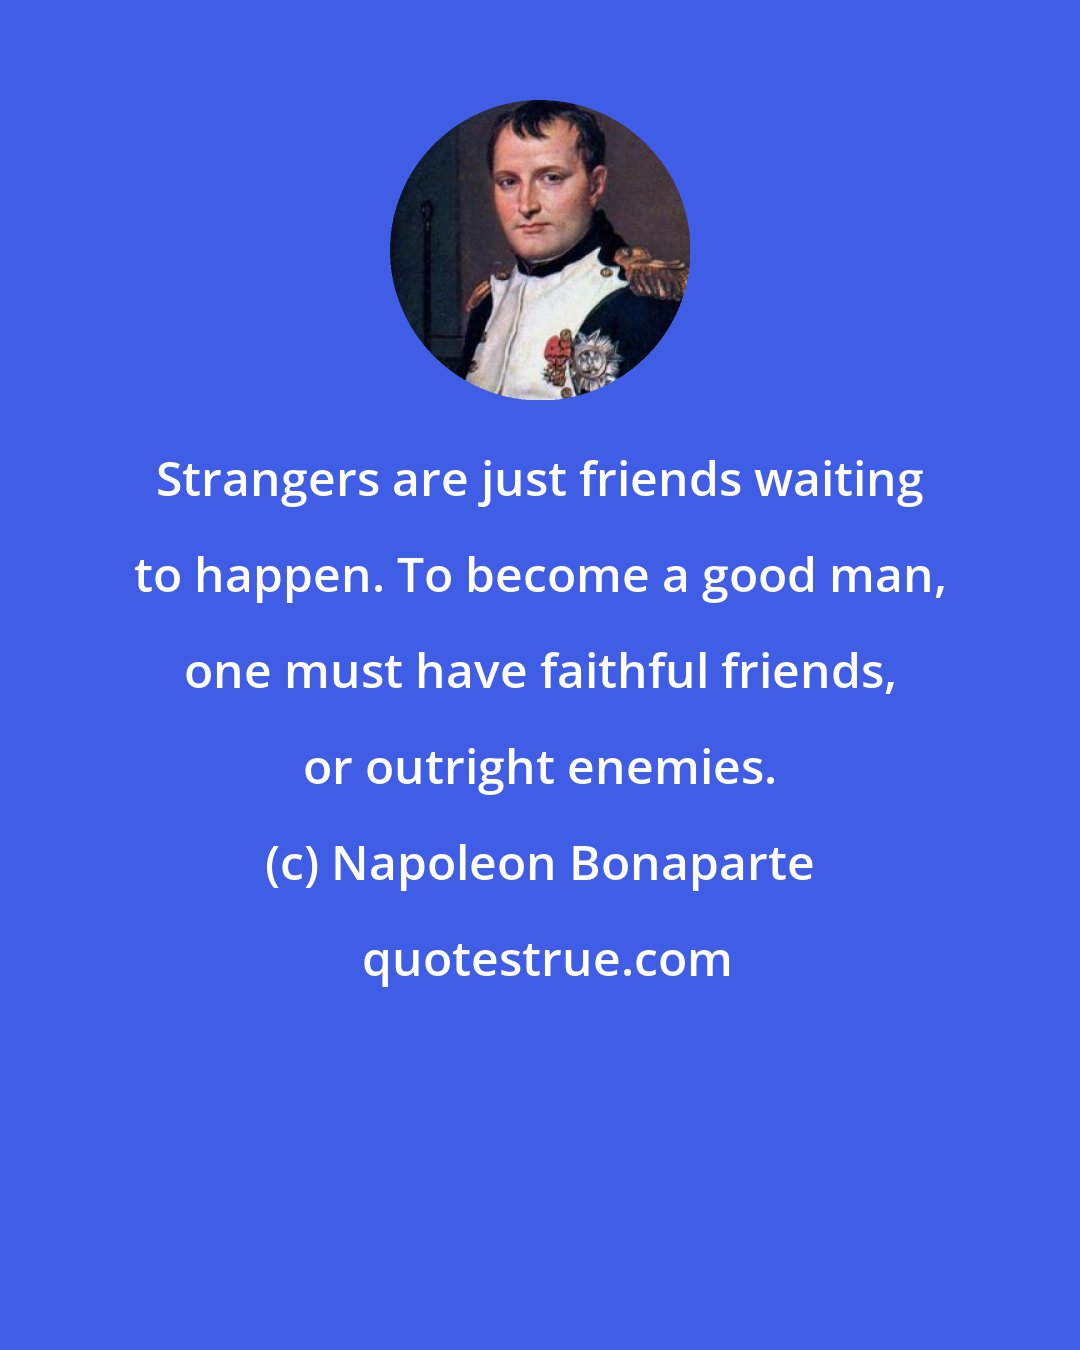 Napoleon Bonaparte: Strangers are just friends waiting to happen. To become a good man, one must have faithful friends, or outright enemies.